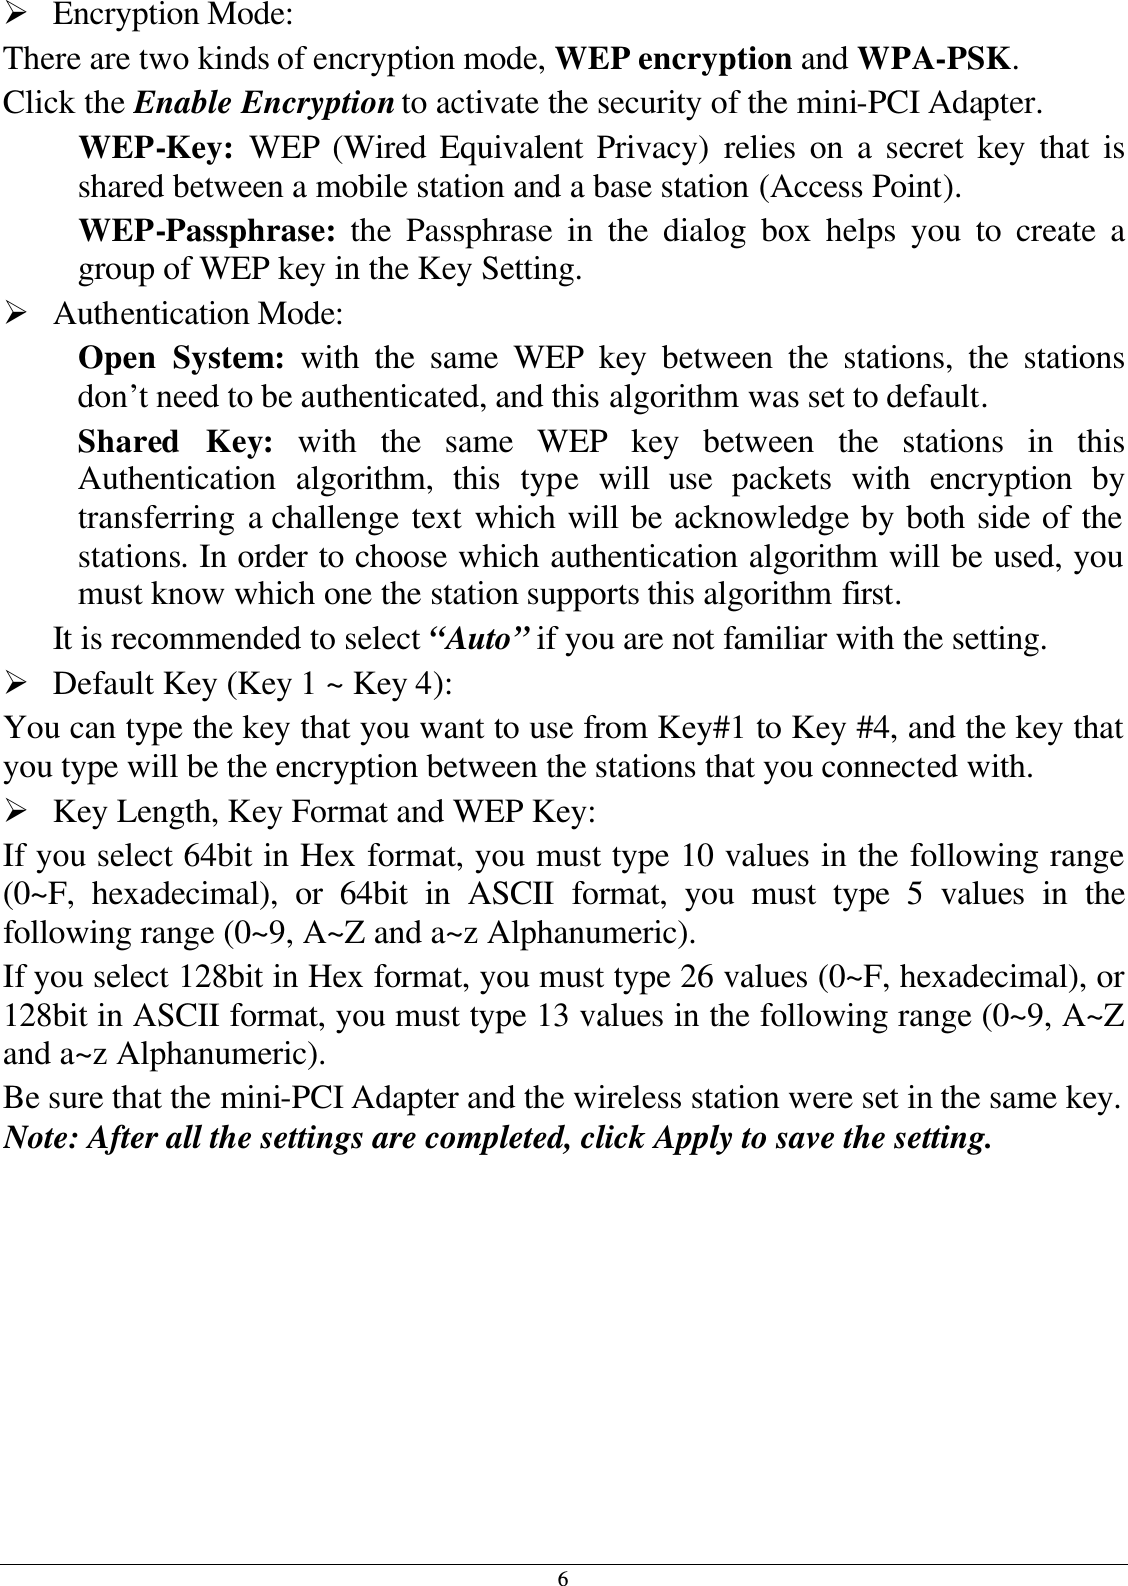 6 Ø Encryption Mode:  There are two kinds of encryption mode, WEP encryption and WPA-PSK. Click the Enable Encryption to activate the security of the mini-PCI Adapter. WEP-Key:  WEP (Wired Equivalent Privacy) relies on a secret key that is shared between a mobile station and a base station (Access Point). WEP-Passphrase: the Passphrase in the dialog box helps you to create a group of WEP key in the Key Setting. Ø Authentication Mode:  Open System: with the same WEP key between the stations, the stations don’t need to be authenticated, and this algorithm was set to default. Shared Key: with the same WEP key between the stations in this Authentication algorithm, this type will use packets with encryption by transferring a challenge text which will be acknowledge by both side of the stations. In order to choose which authentication algorithm will be used, you must know which one the station supports this algorithm first. It is recommended to select “Auto” if you are not familiar with the setting. Ø Default Key (Key 1 ~ Key 4):  You can type the key that you want to use from Key#1 to Key #4, and the key that you type will be the encryption between the stations that you connected with.  Ø Key Length, Key Format and WEP Key: If you select 64bit in Hex format, you must type 10 values in the following range (0~F, hexadecimal), or 64bit in ASCII format, you must type 5 values in the following range (0~9, A~Z and a~z Alphanumeric).  If you select 128bit in Hex format, you must type 26 values (0~F, hexadecimal), or 128bit in ASCII format, you must type 13 values in the following range (0~9, A~Z and a~z Alphanumeric). Be sure that the mini-PCI Adapter and the wireless station were set in the same key. Note: After all the settings are completed, click Apply to save the setting. 